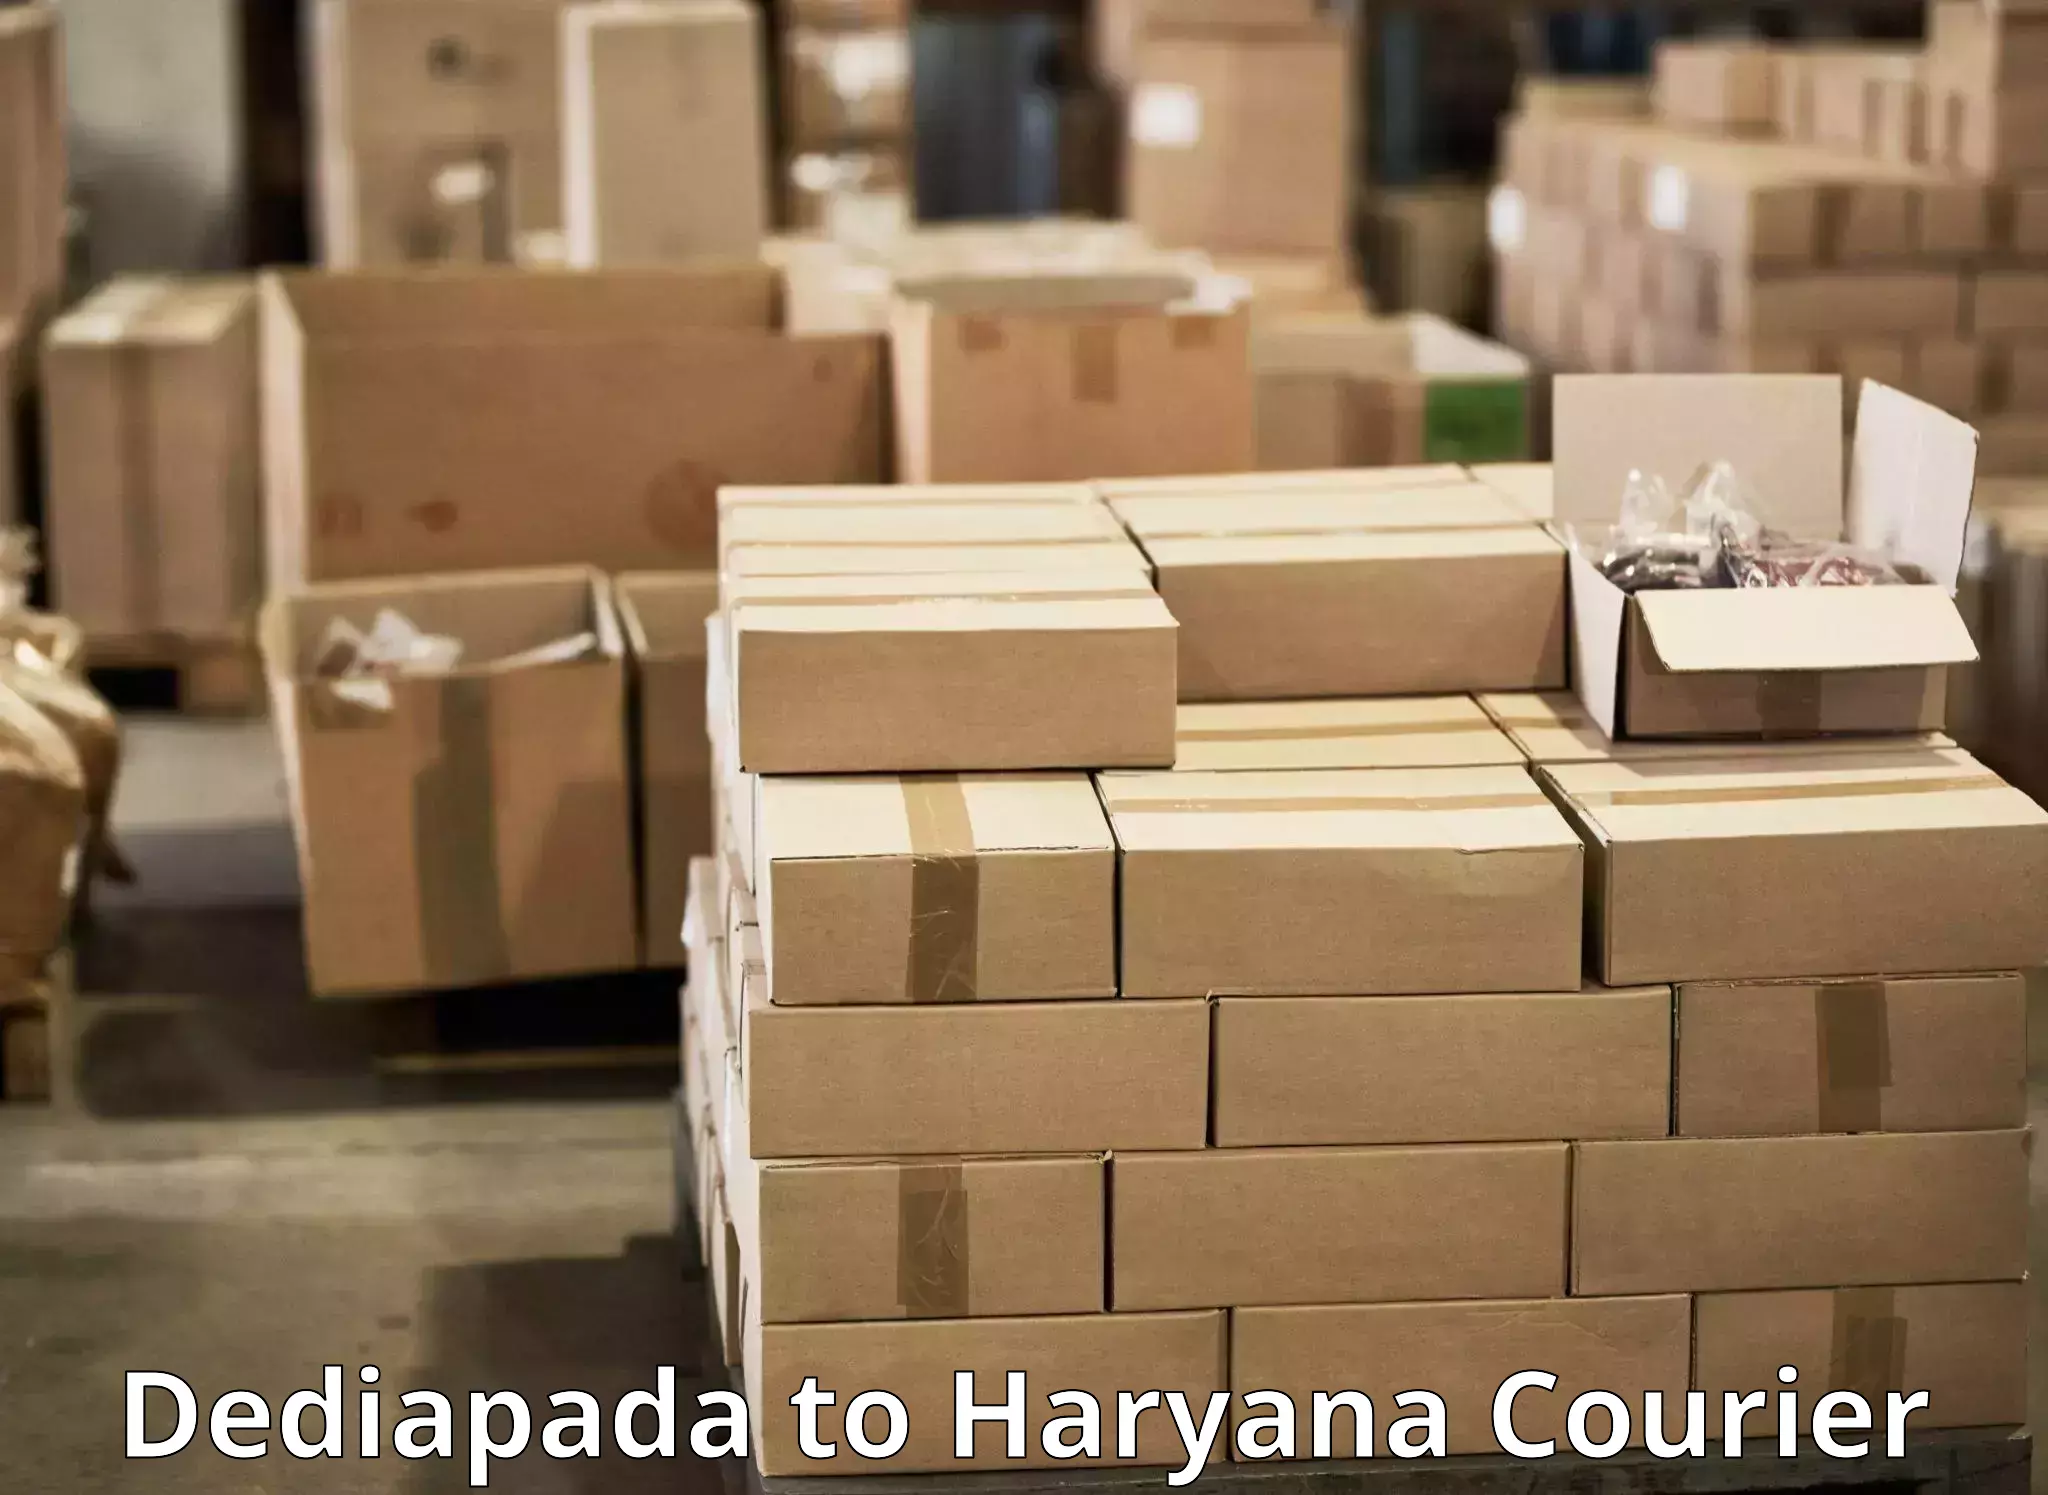 Optimized delivery routes in Dediapada to NCR Haryana